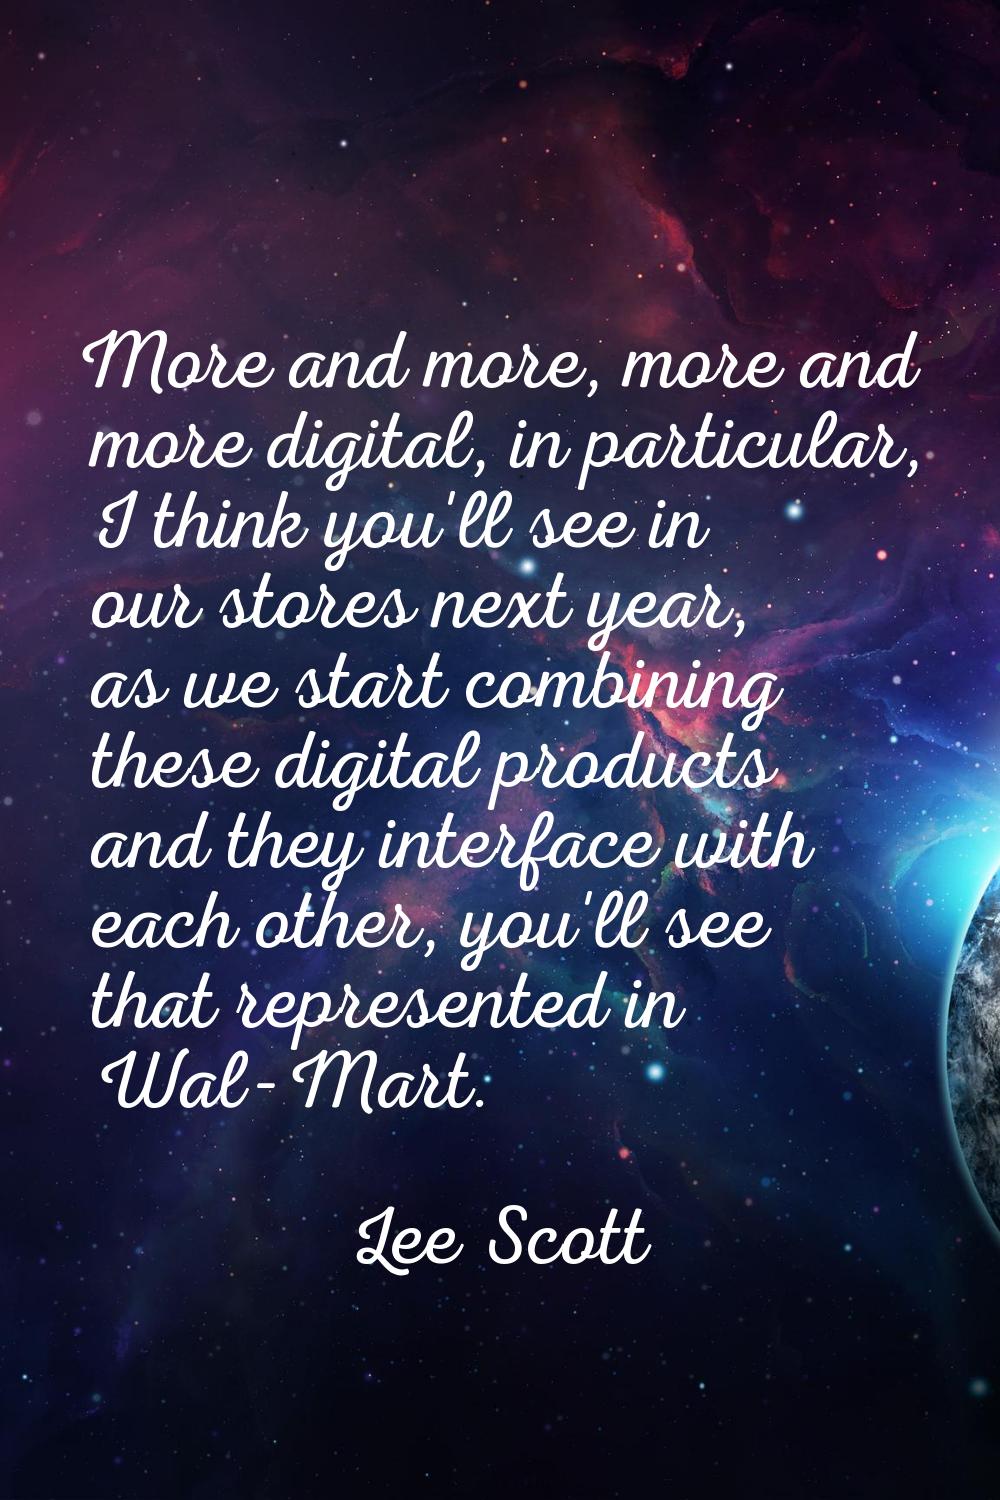 More and more, more and more digital, in particular, I think you'll see in our stores next year, as